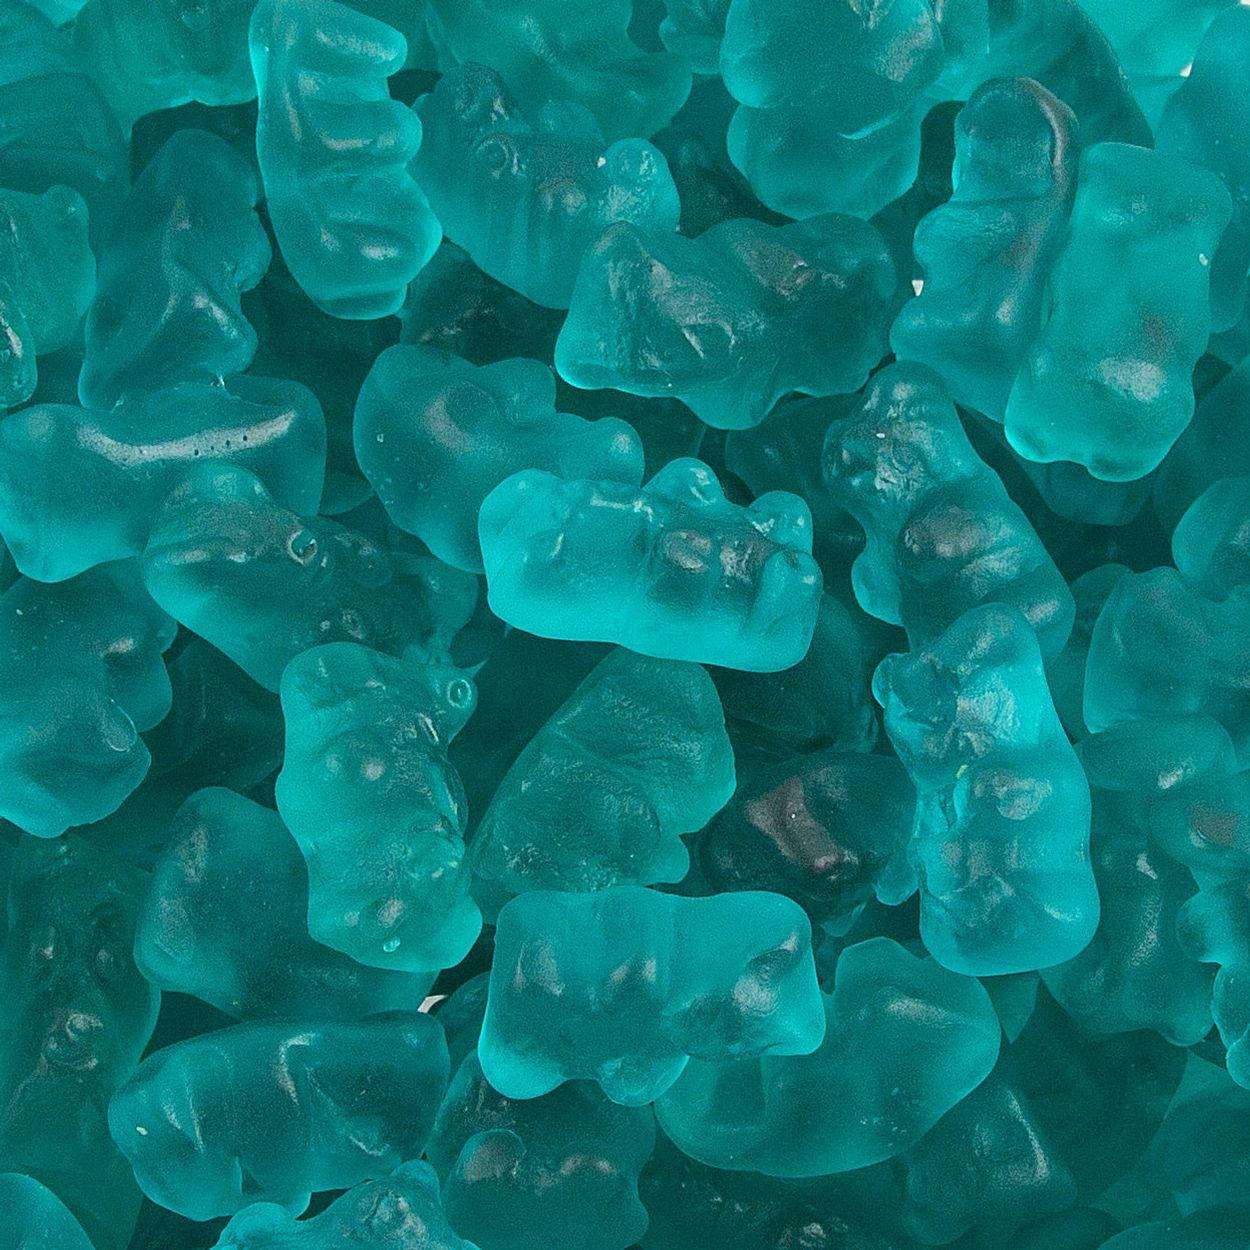 A close up of some green gummy bears - Teal, turquoise